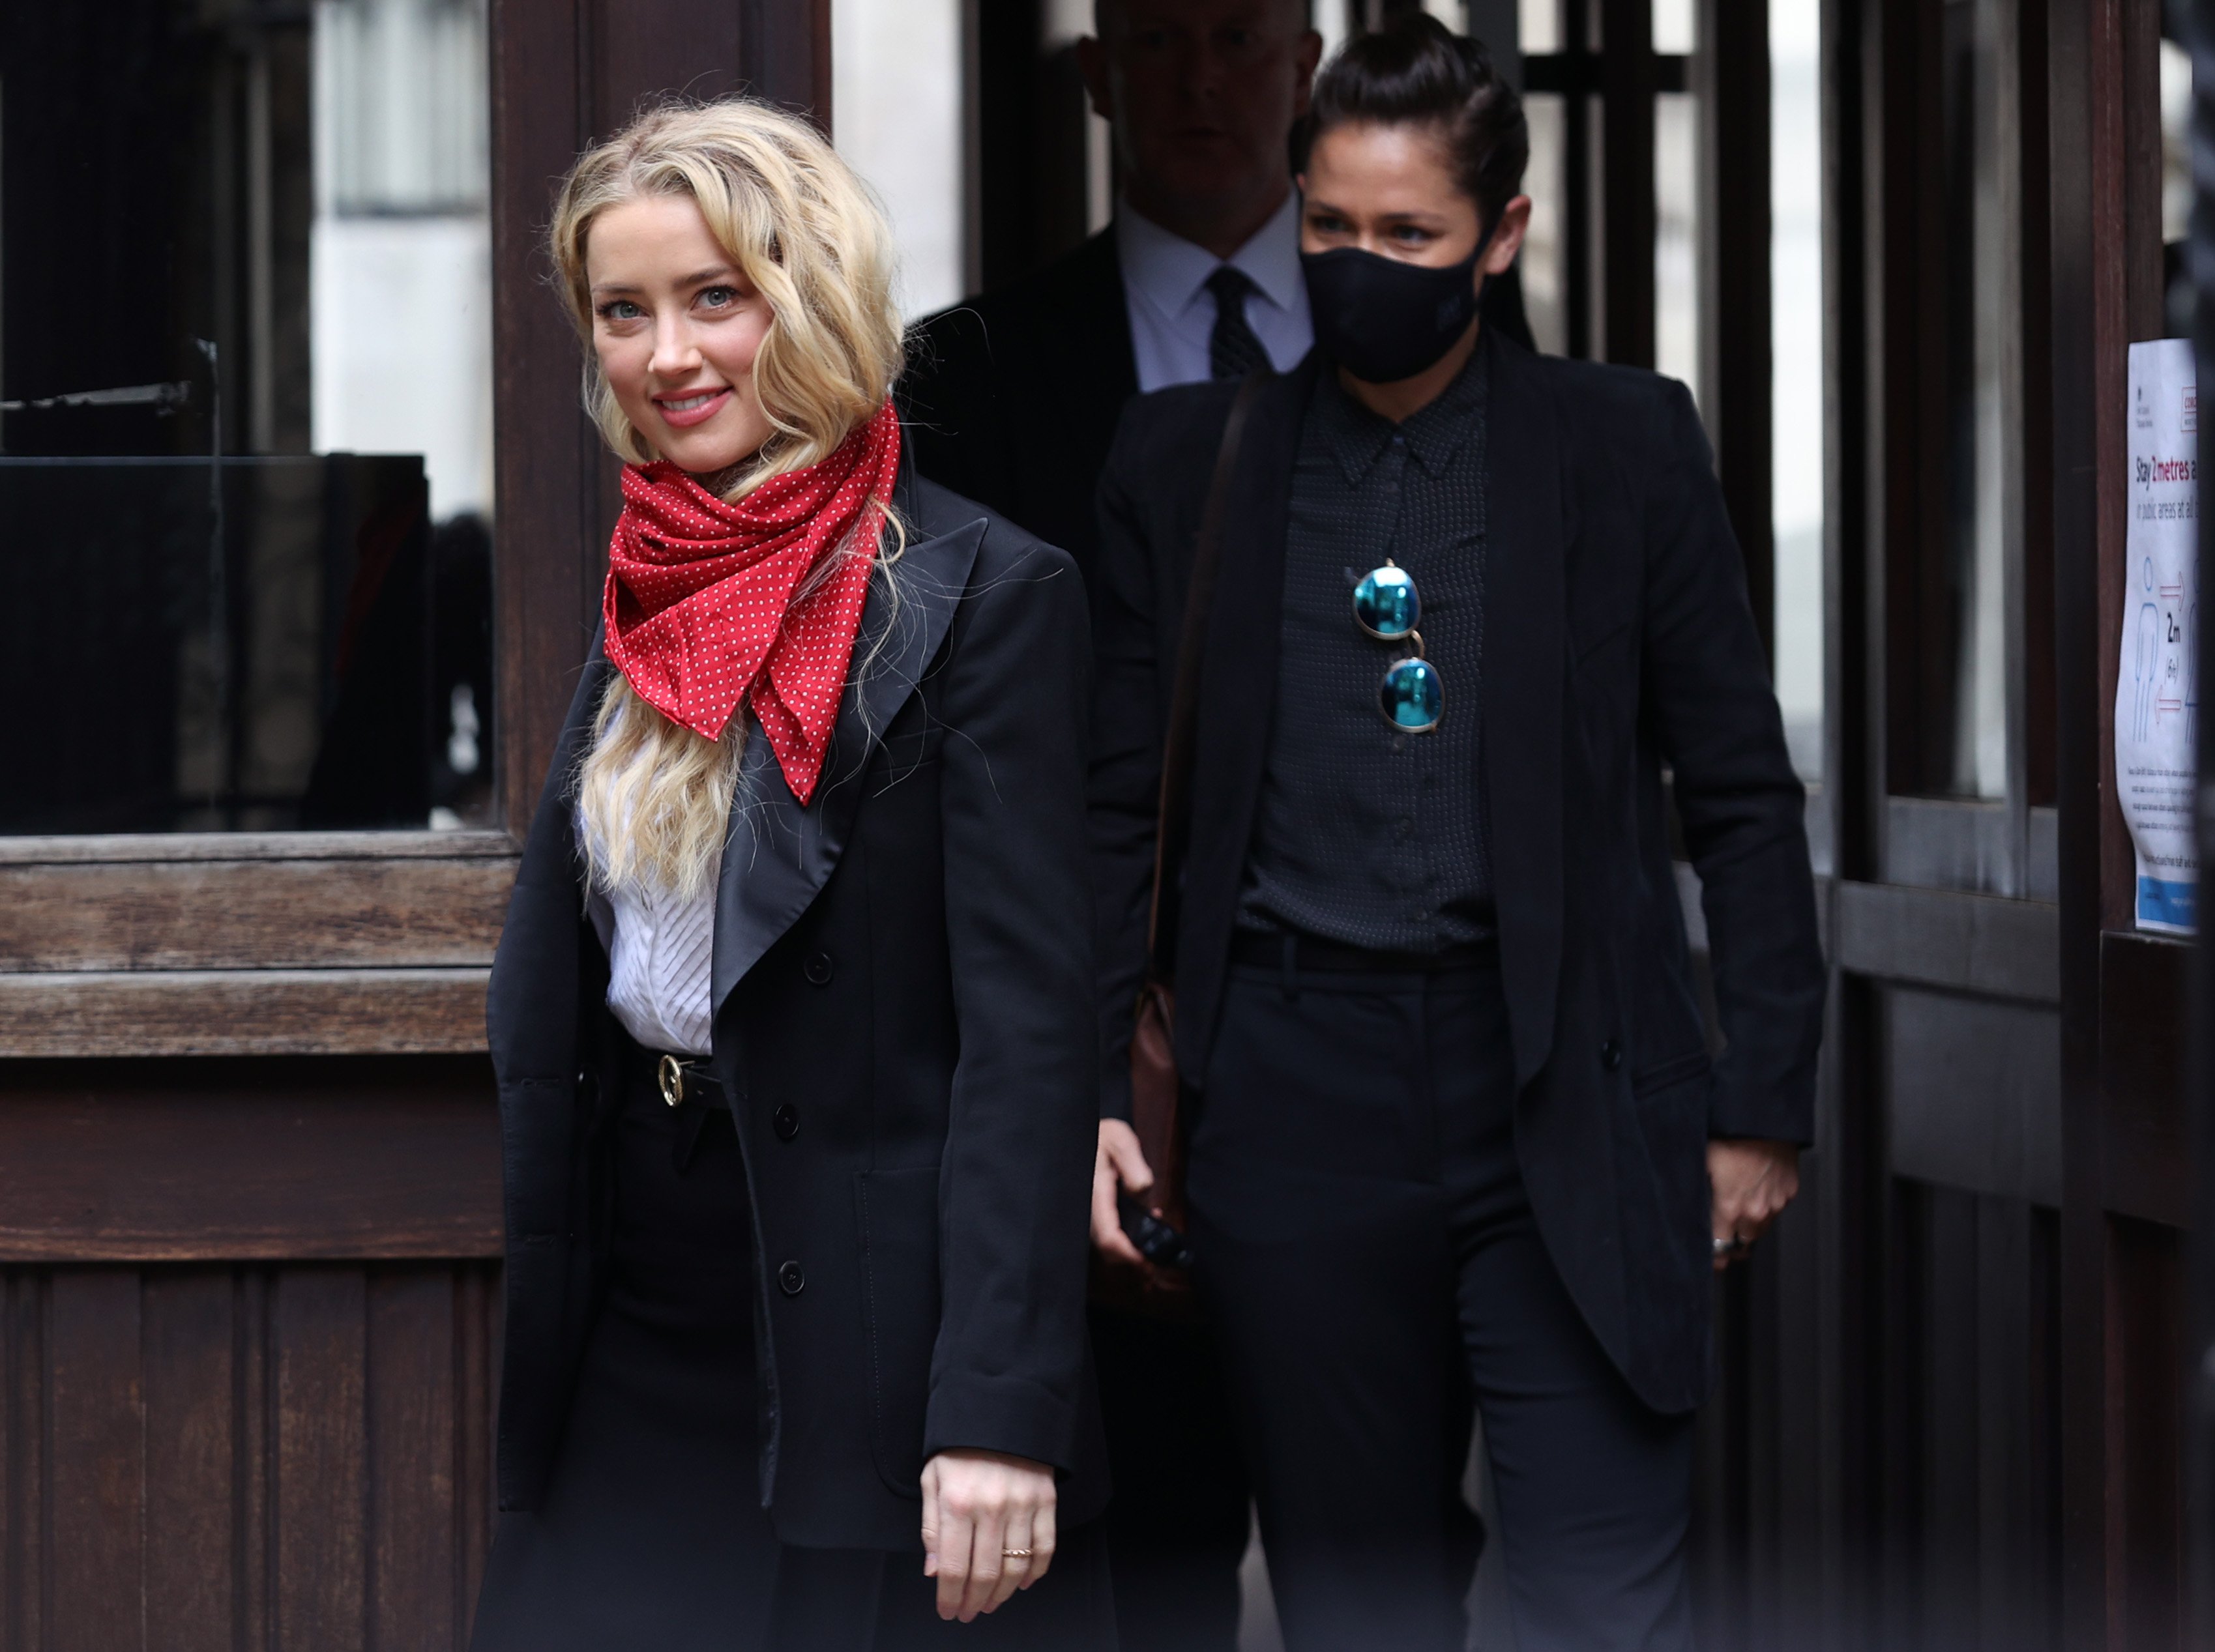 Bianca Butti and ex-girlfriend, Amber Heard, arrive at the High Court in London for Johnny Depp's libel case against the publishers of The Sun. | Source: Getty Images